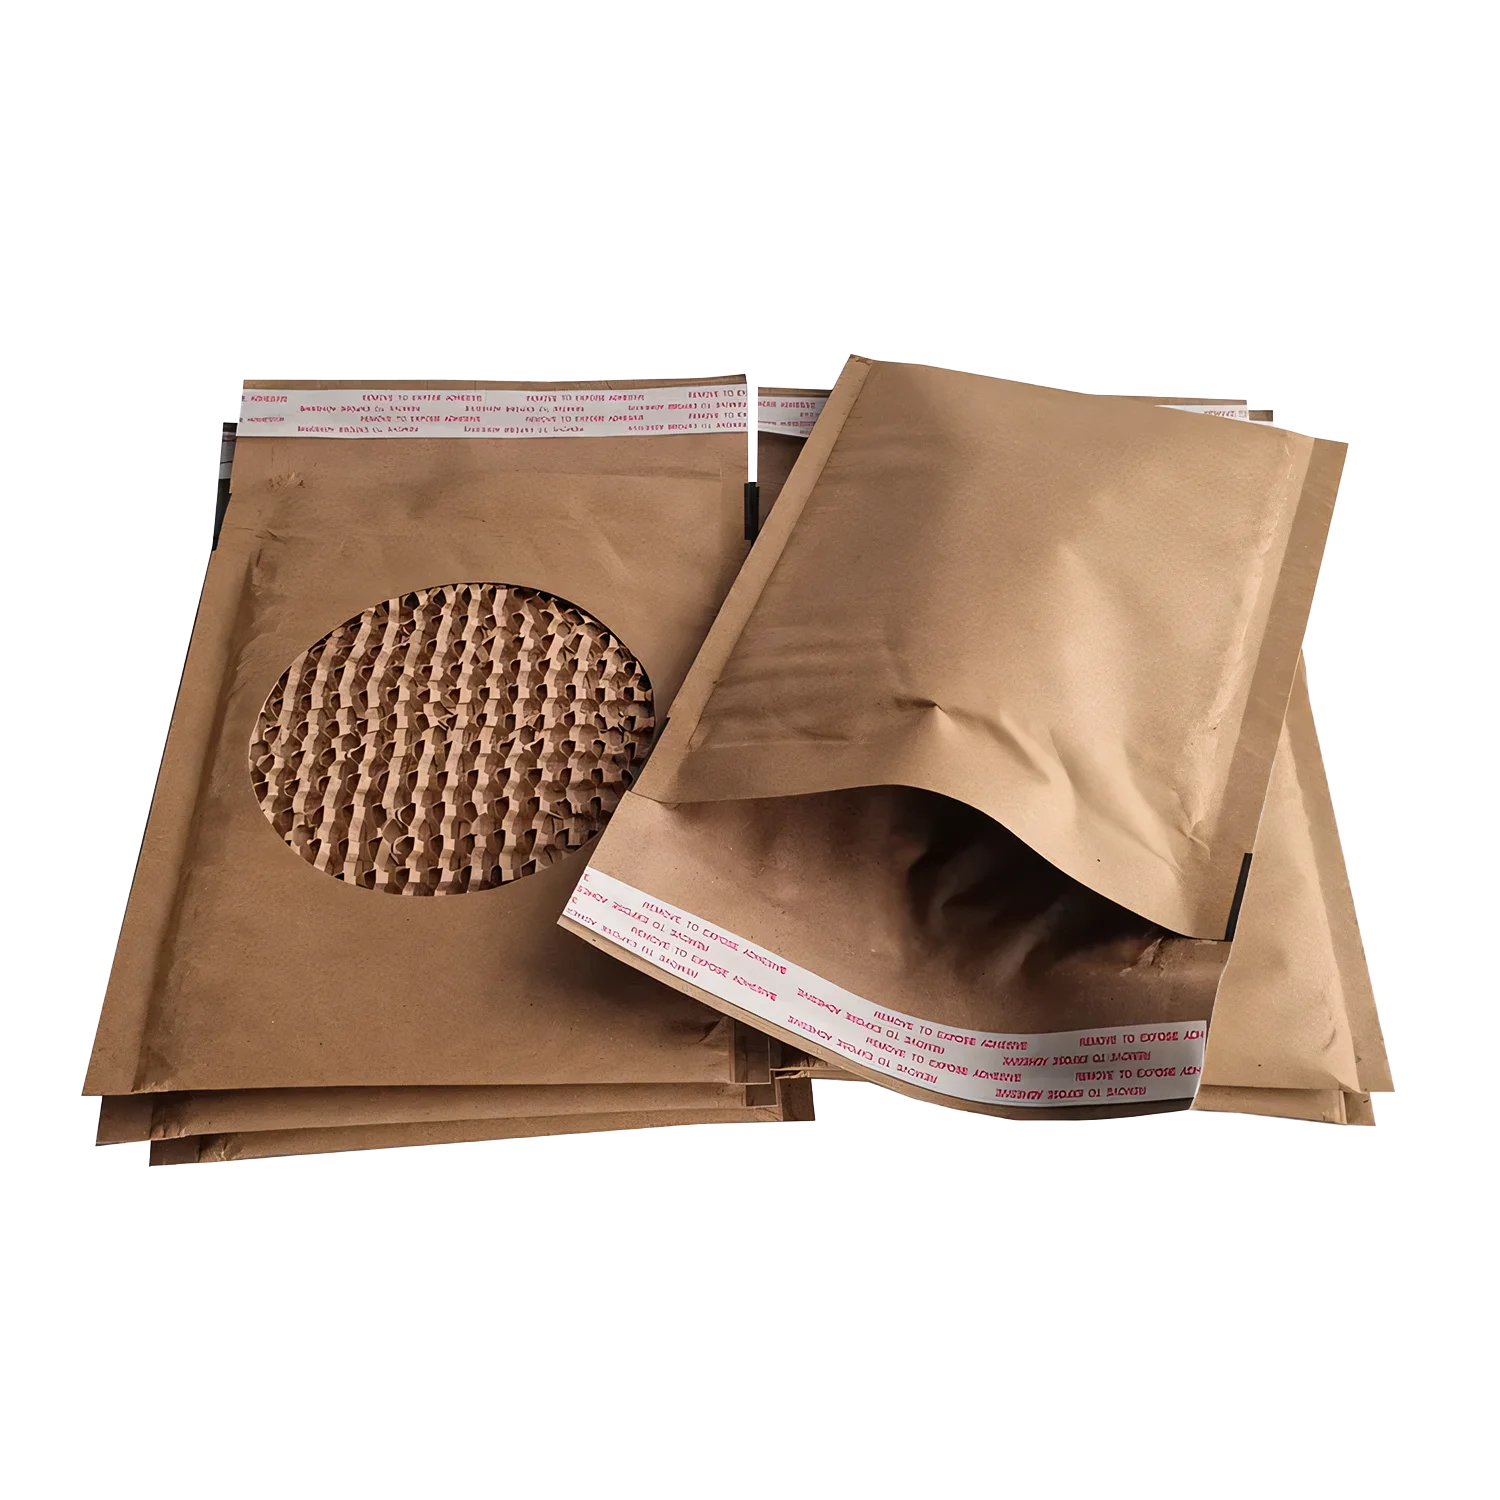 Honeycomb padded envelopes sustainable and compostable inner protective lining